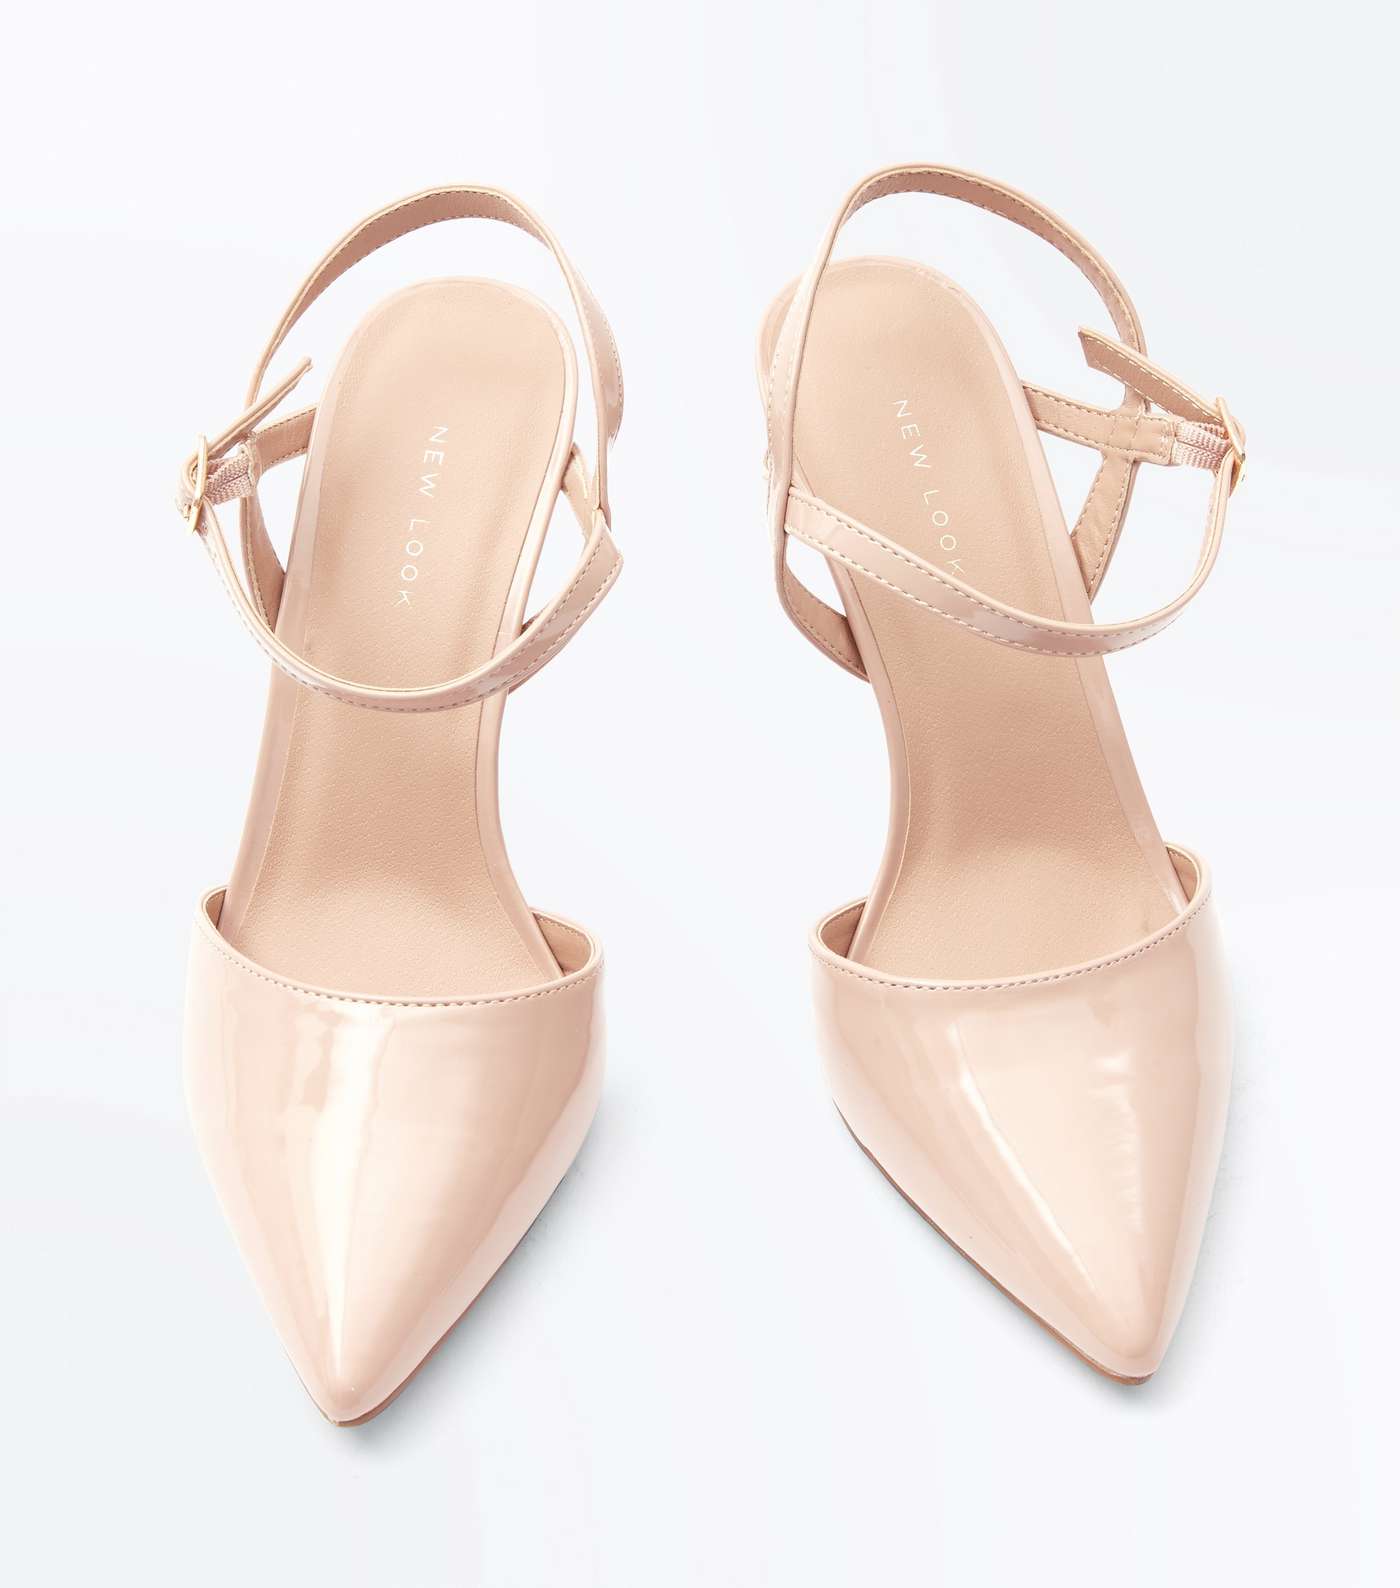 Nude Patent Ankle Strap Court Shoes Image 4